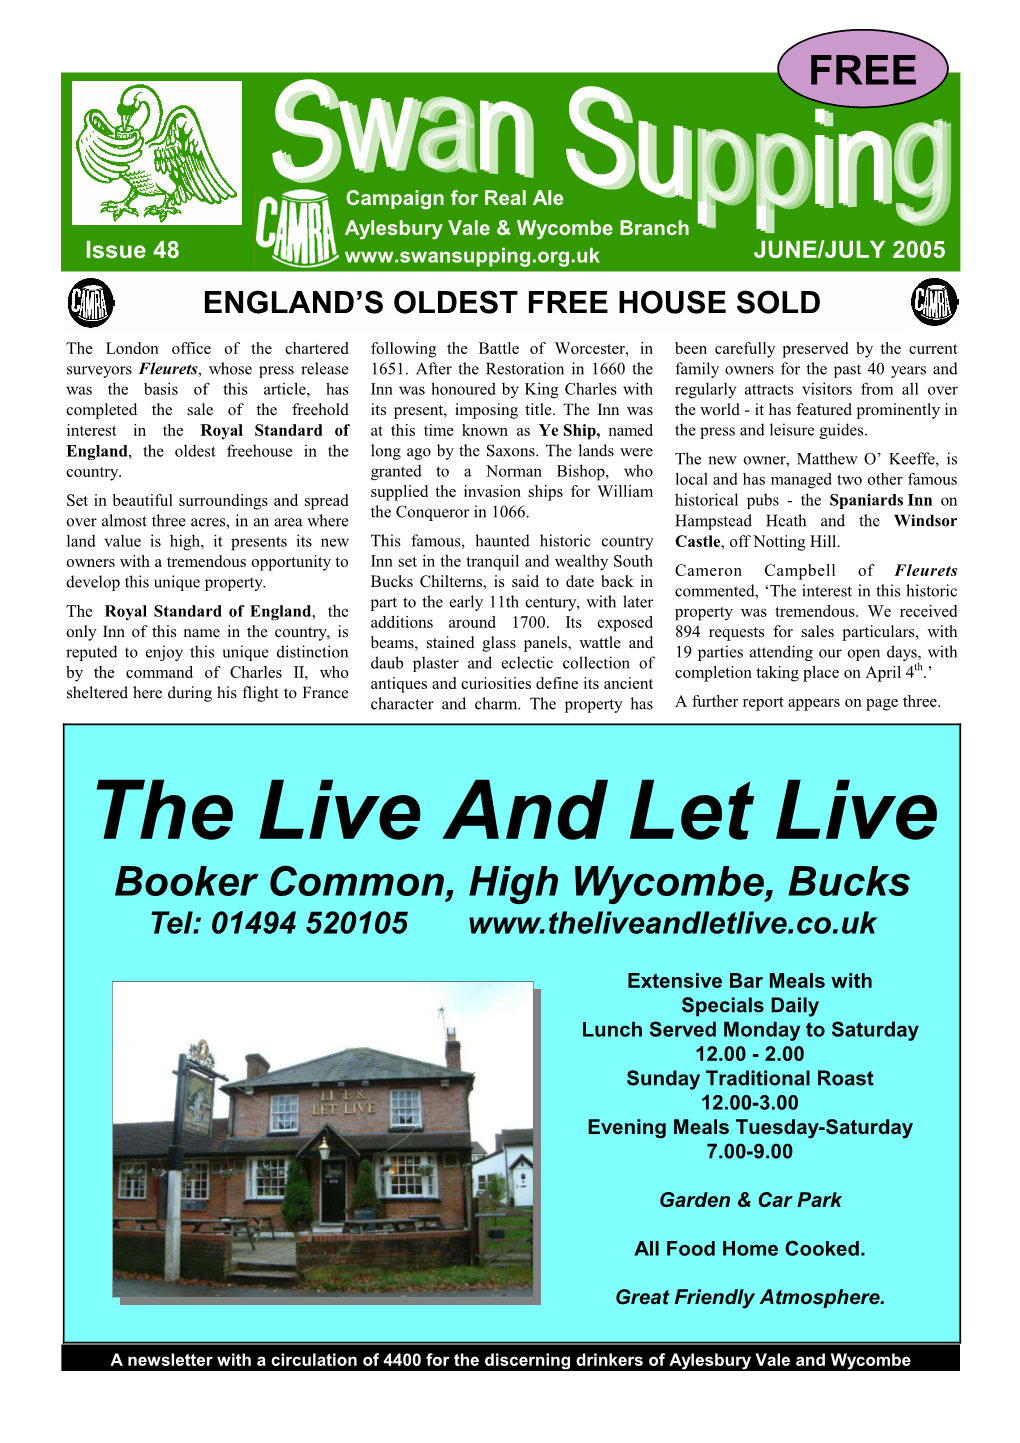 The Live and Let Live Booker Common, High Wycombe, Bucks Tel: 01494 520105